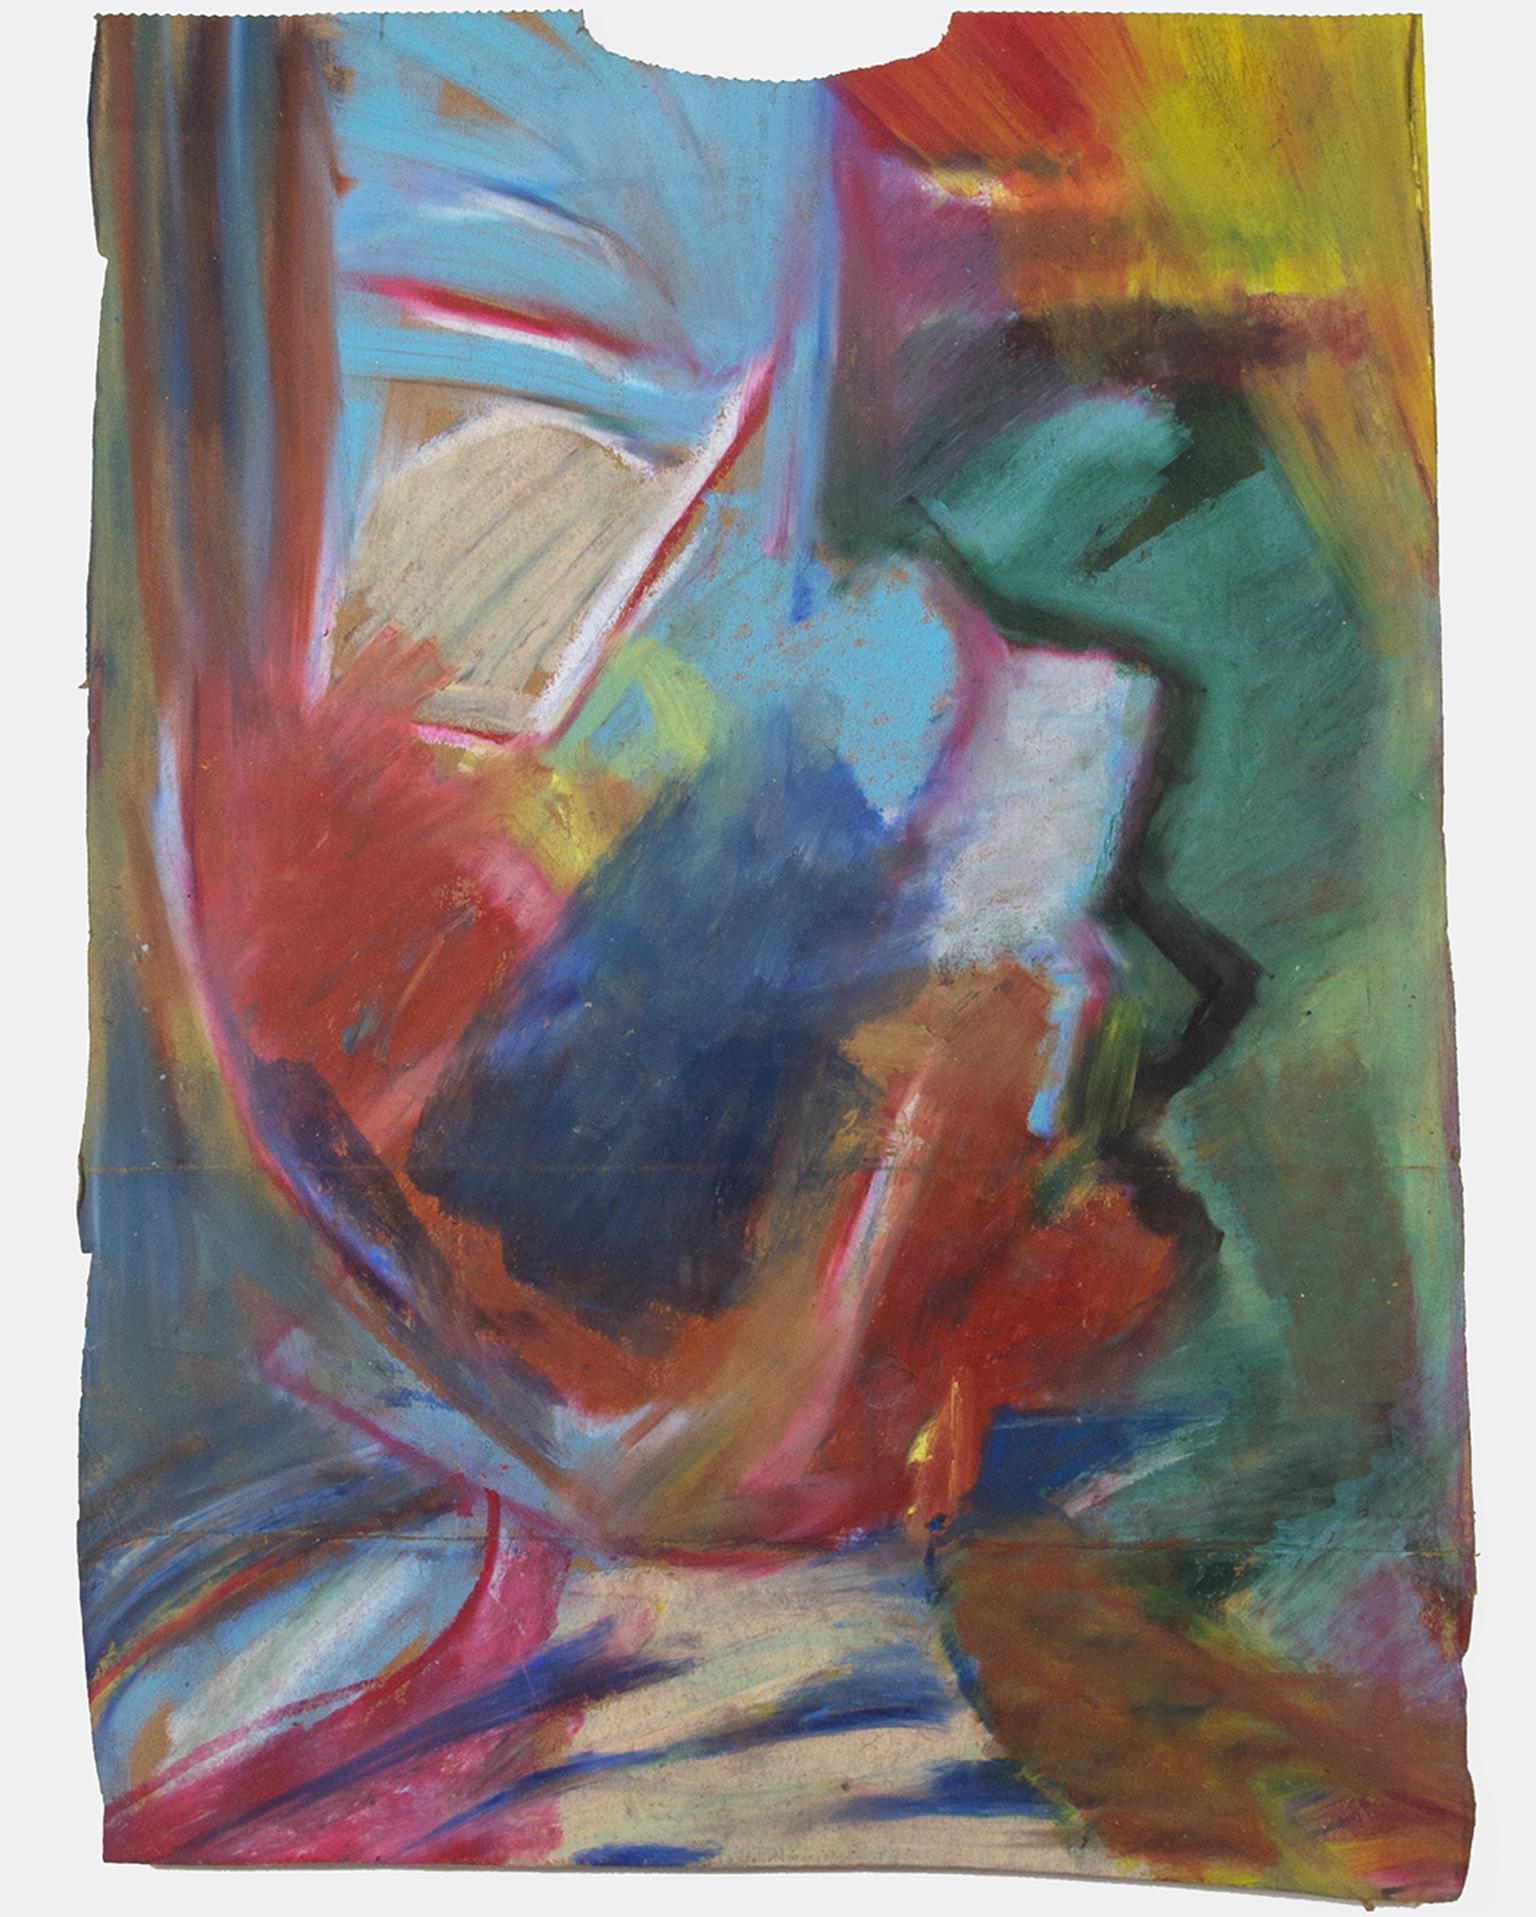 "Jittip, " Abstract Oil Pastel on a Grocery Bag signed by Reginald K. Gee